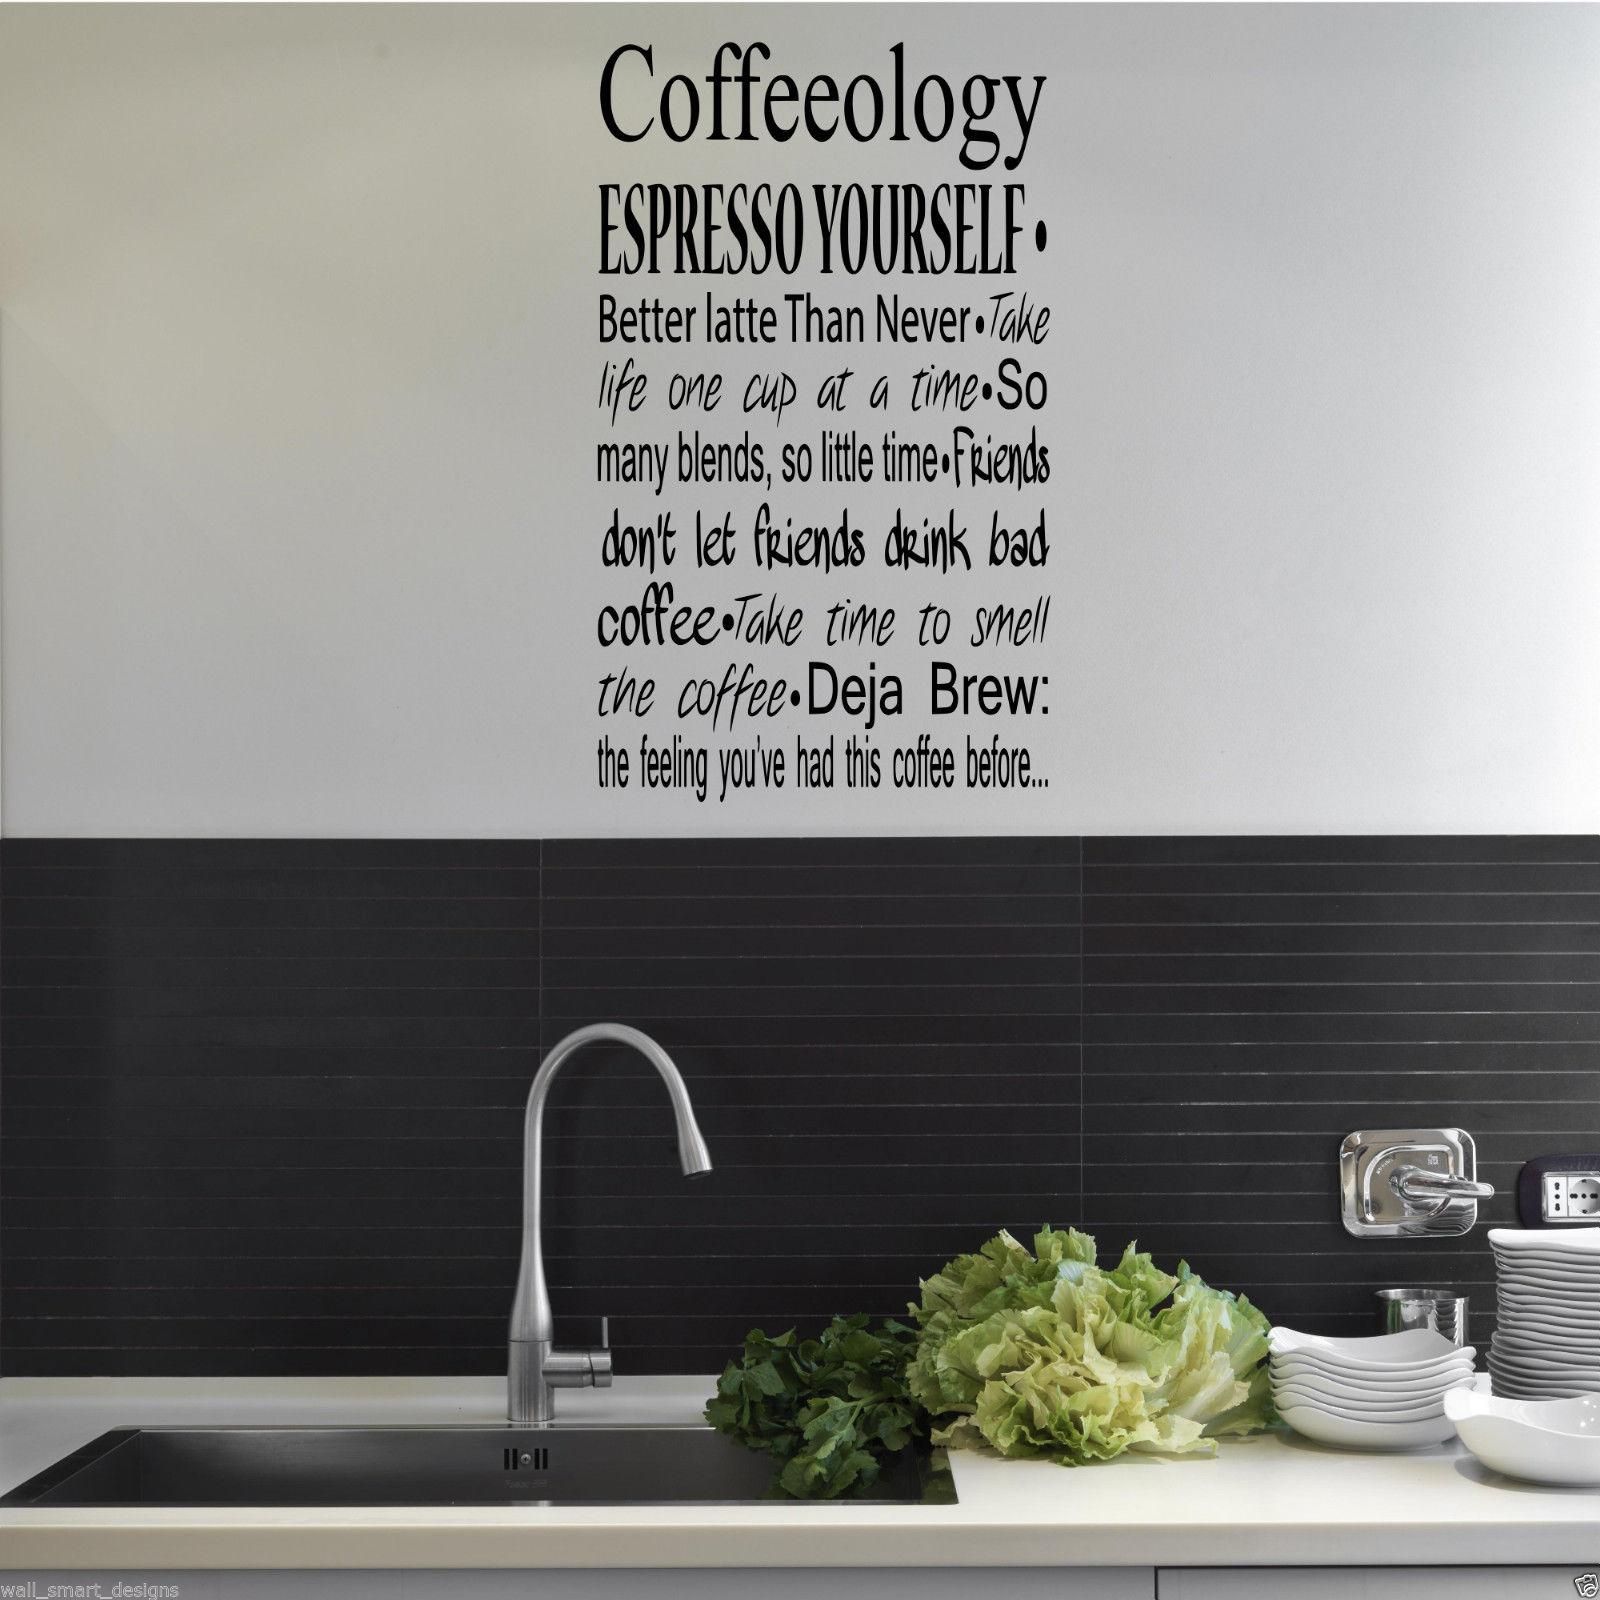 Coffee Coffeeology Kitchen Wall Art Sticker Quote Decal Mural In Cafe Latte Kitchen Wall Art (View 5 of 20)